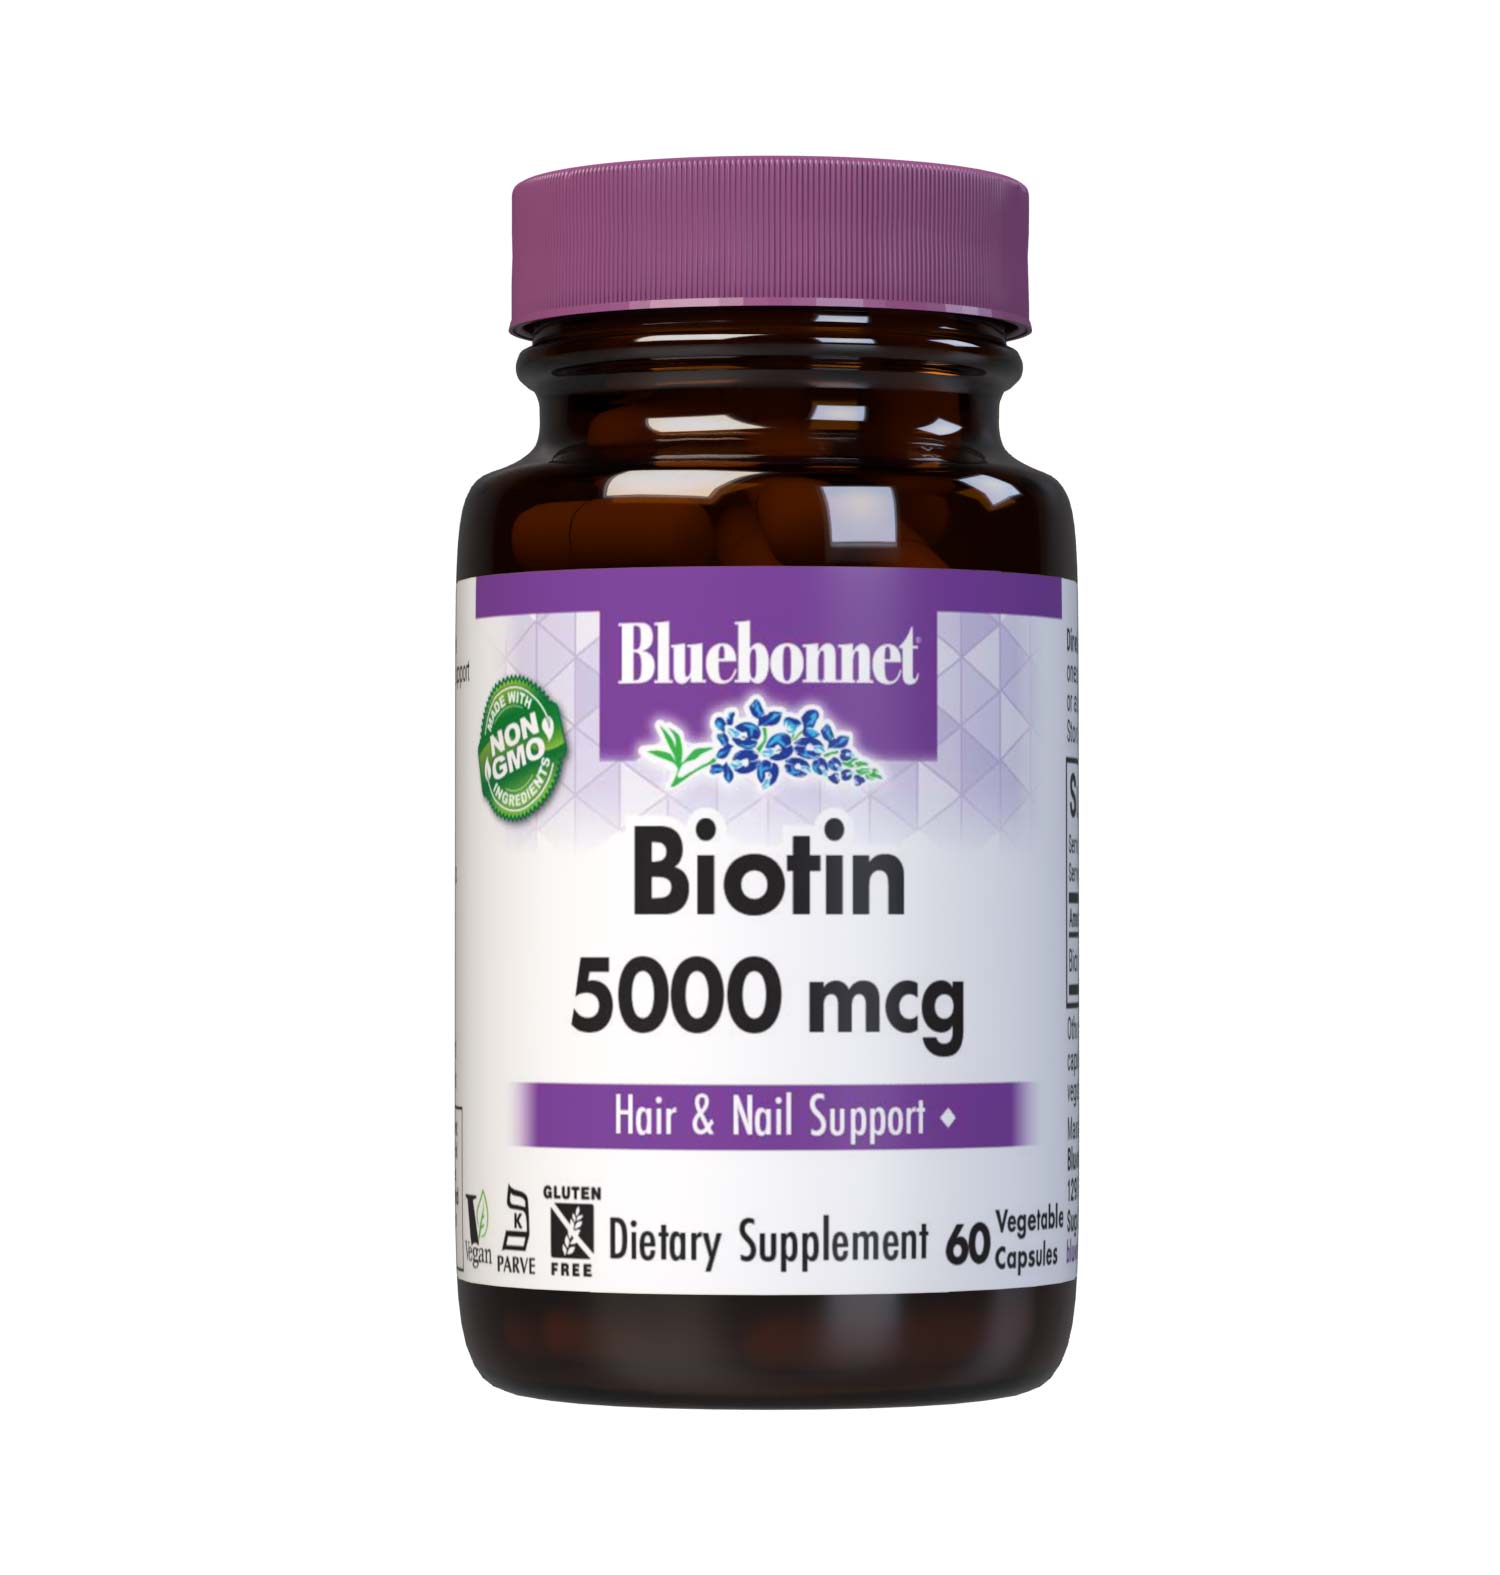 Bluebonnet’s Biotin 5000 mcg Capsules are formulated with yeast-free biotin in its crystalline form to support healthy hair and strong, durable nails.  #size_60 count